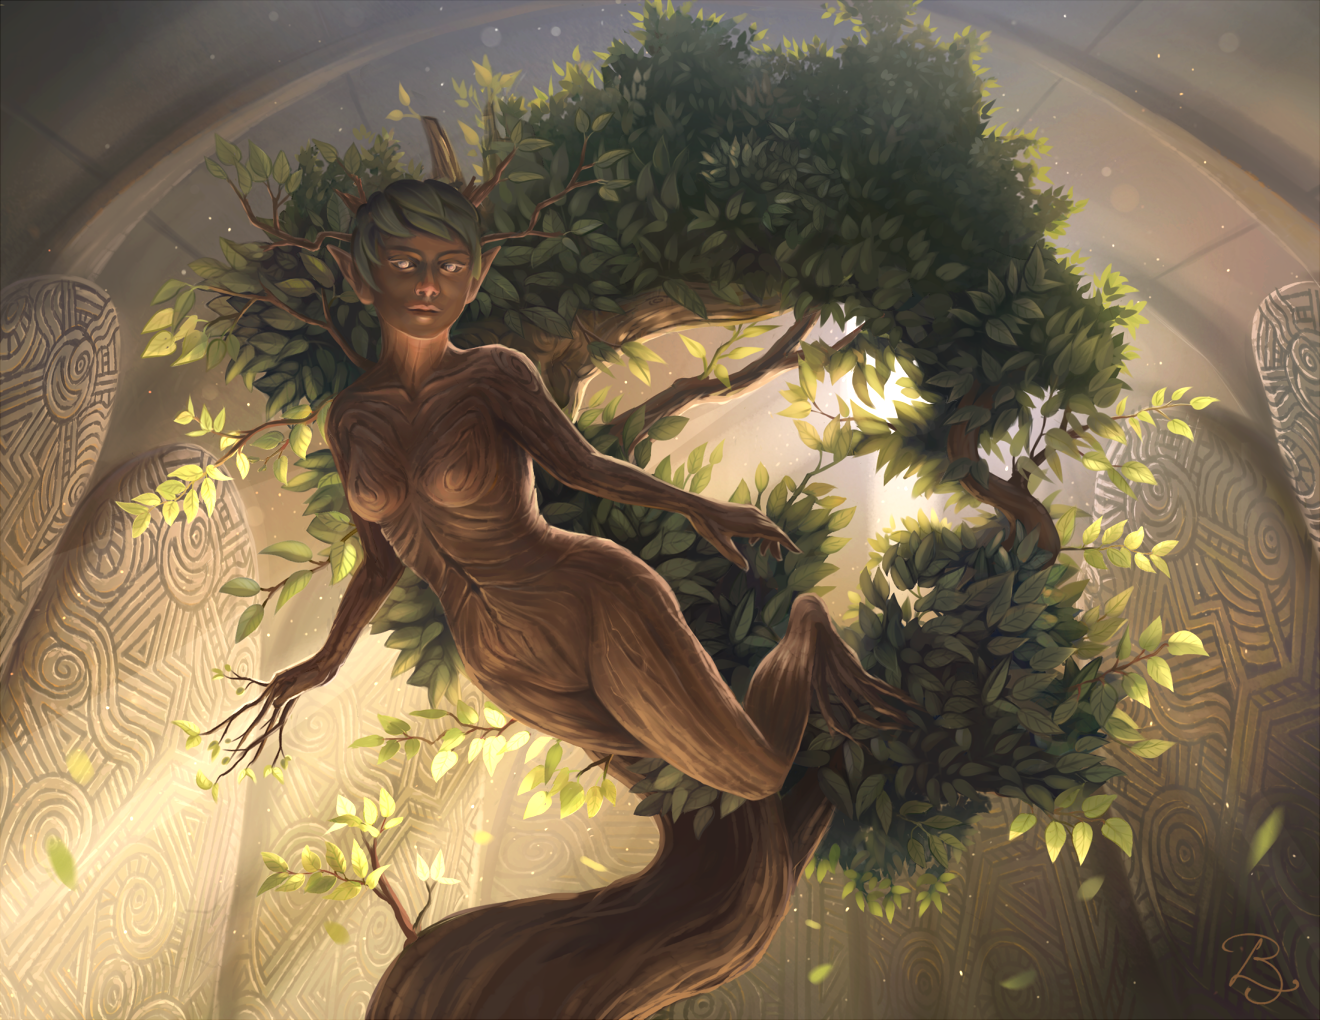 http://orig05.deviantart.net/fd69/f/2017/111/9/7/omicontest__lund___goddess_of_nature_by_selven7-db6ftmm.png